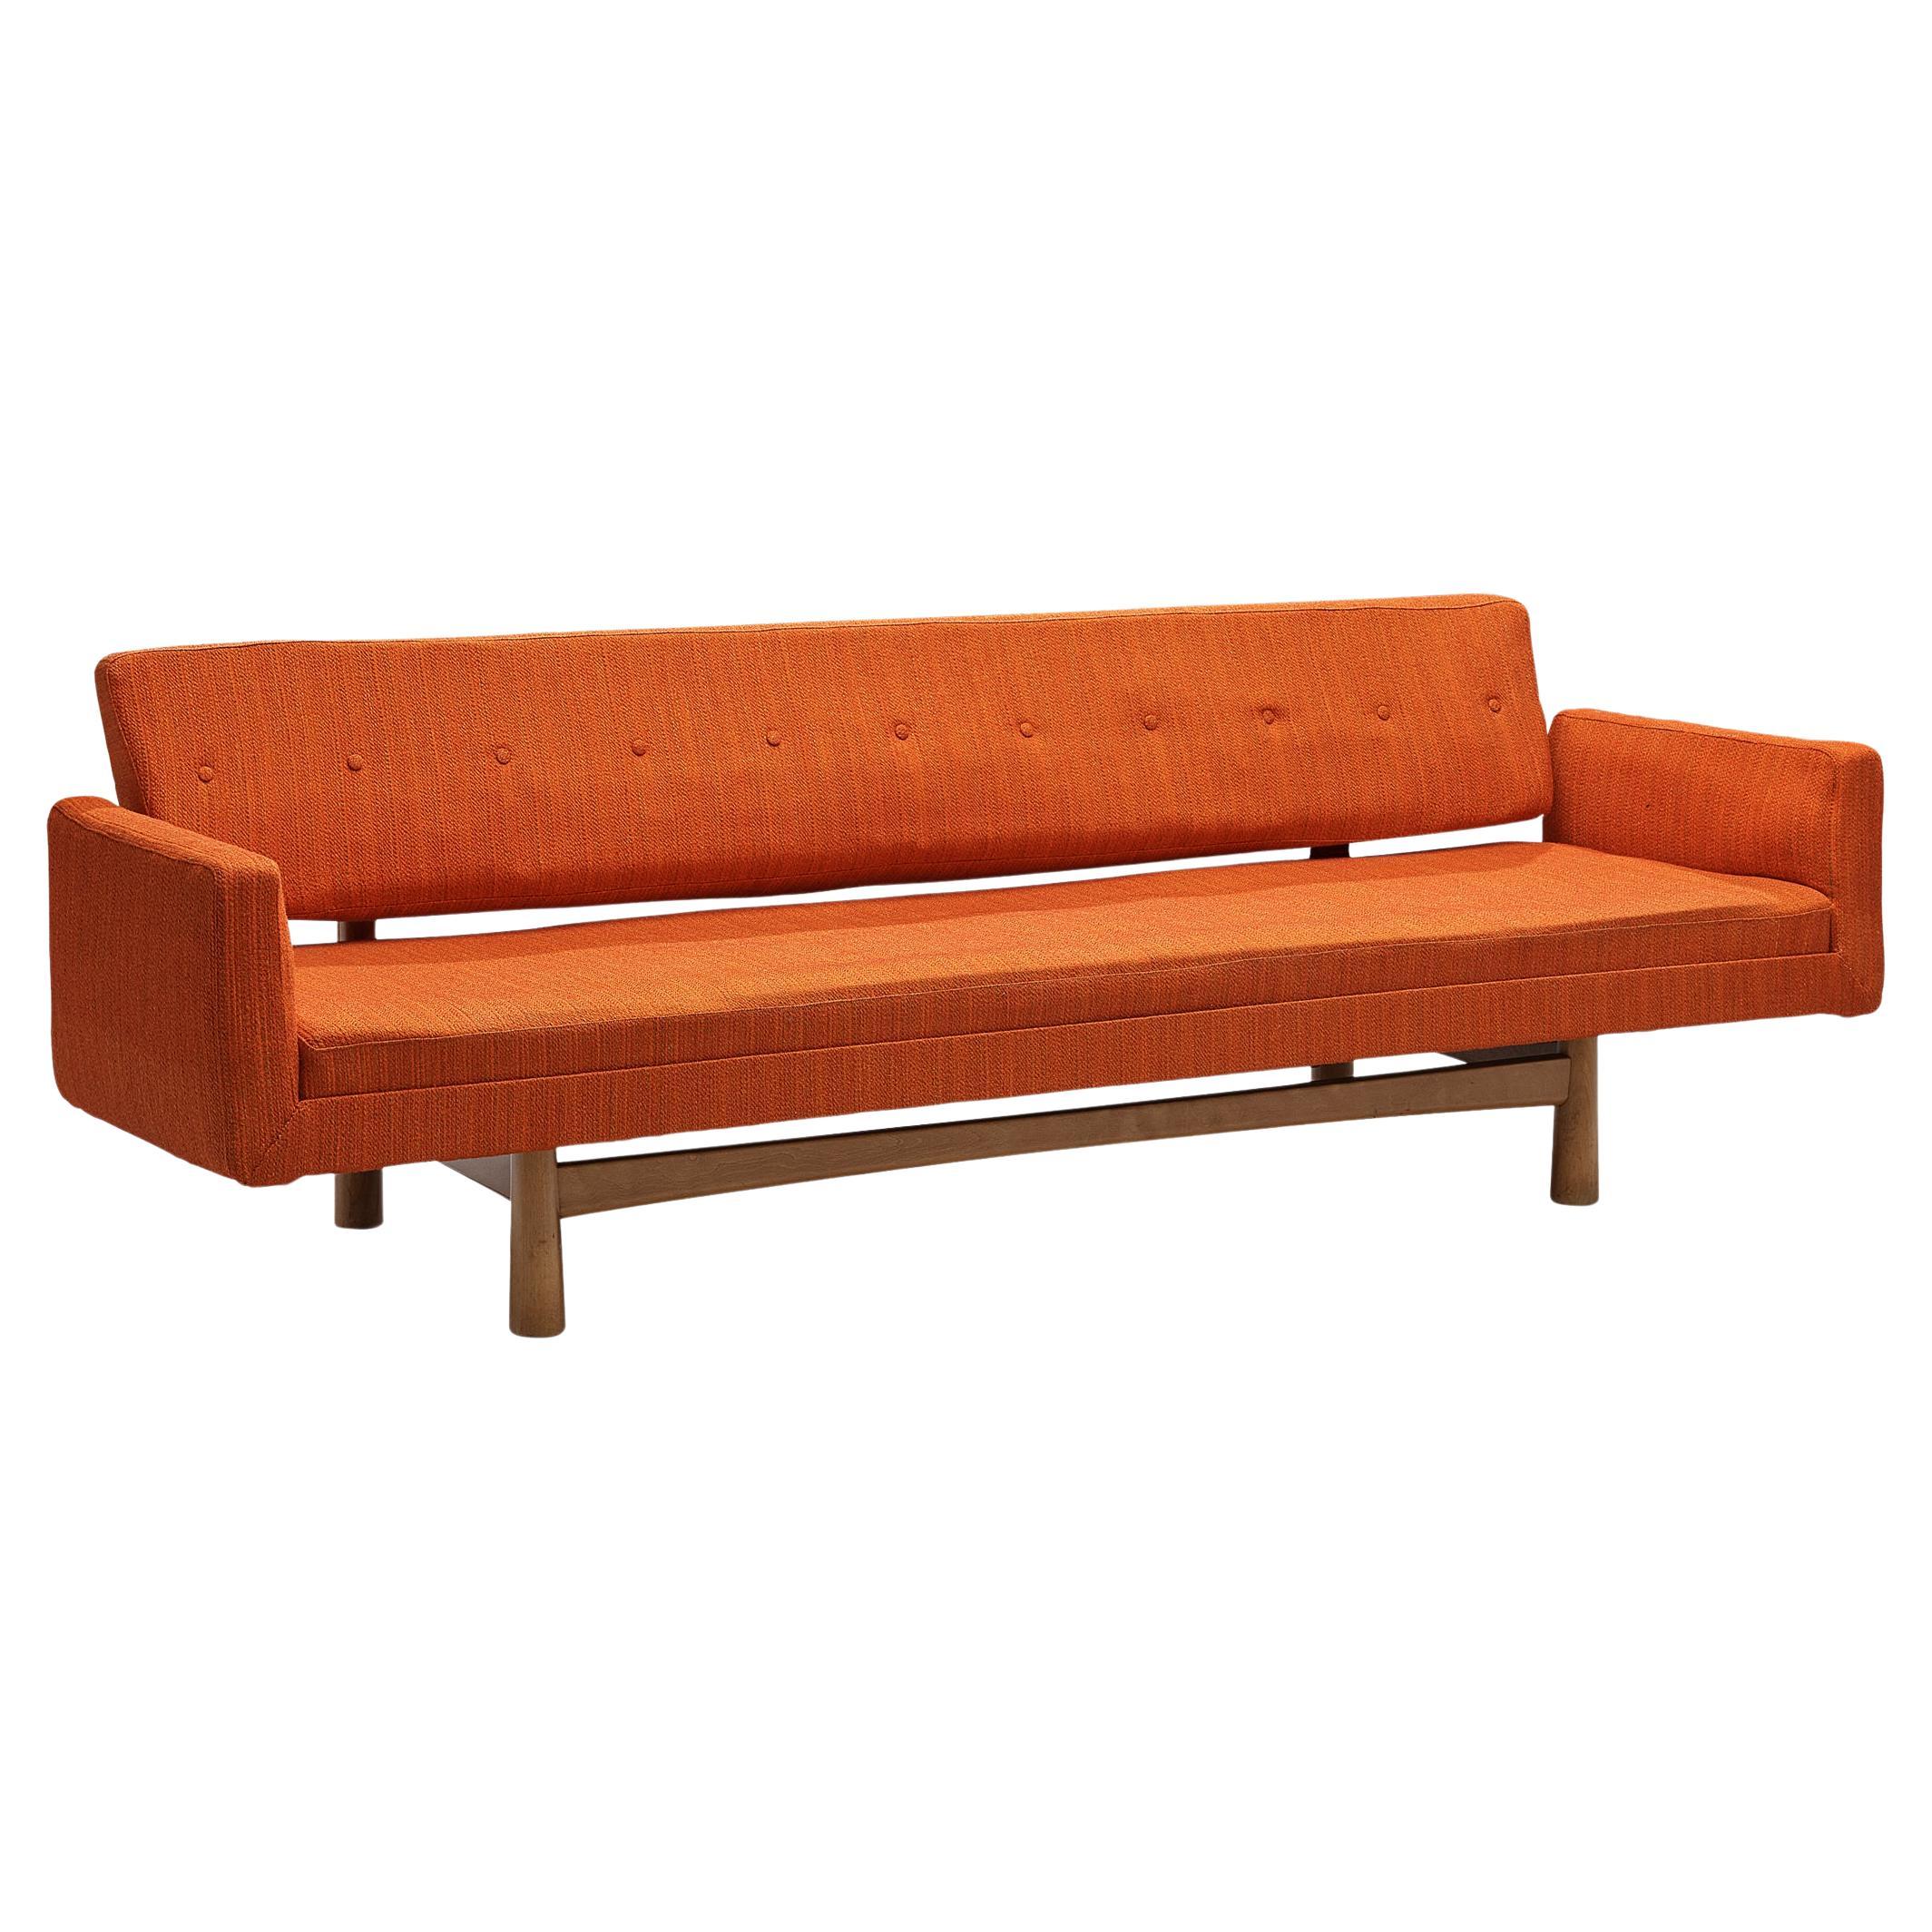 Edward Wormley 'New York' Sofa in Orange Upholstery  For Sale